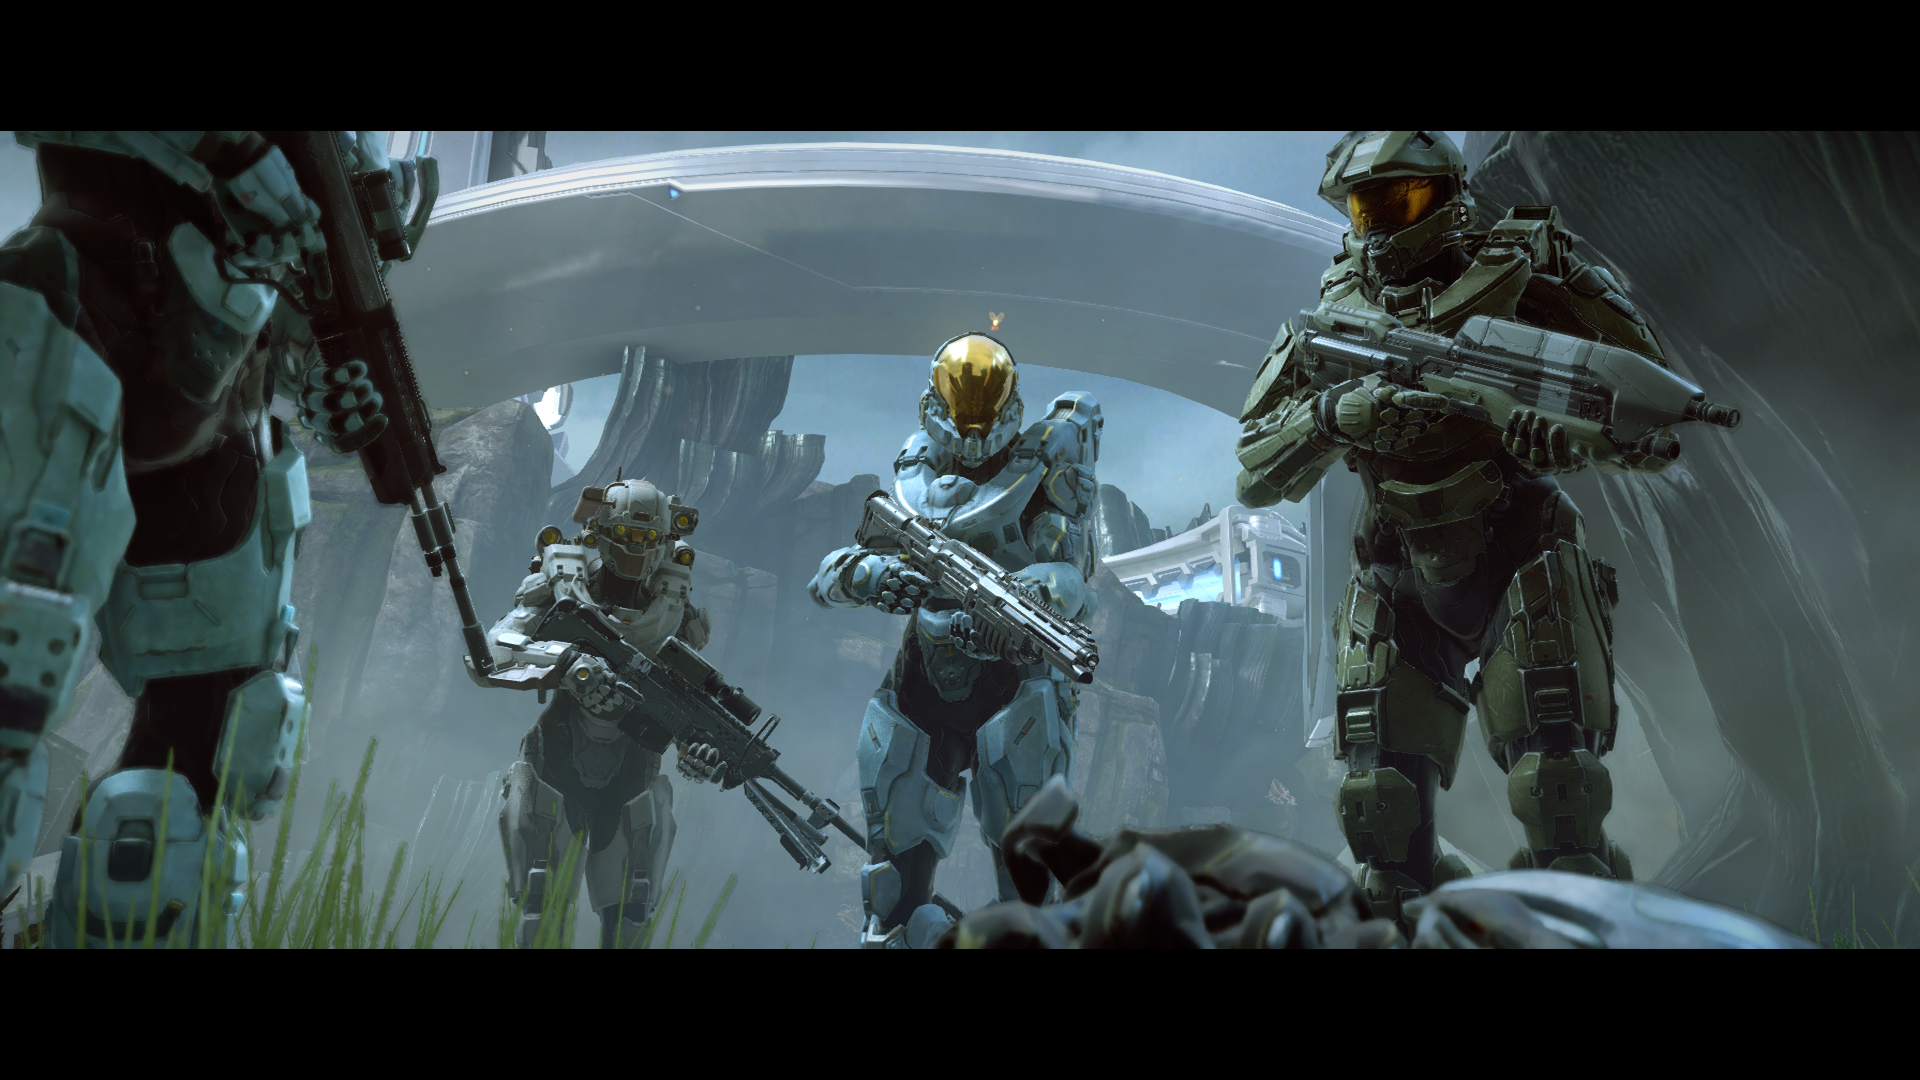 Halo 5 Guardians Master Chief Blue Team UNSC Infinity 1920x1080